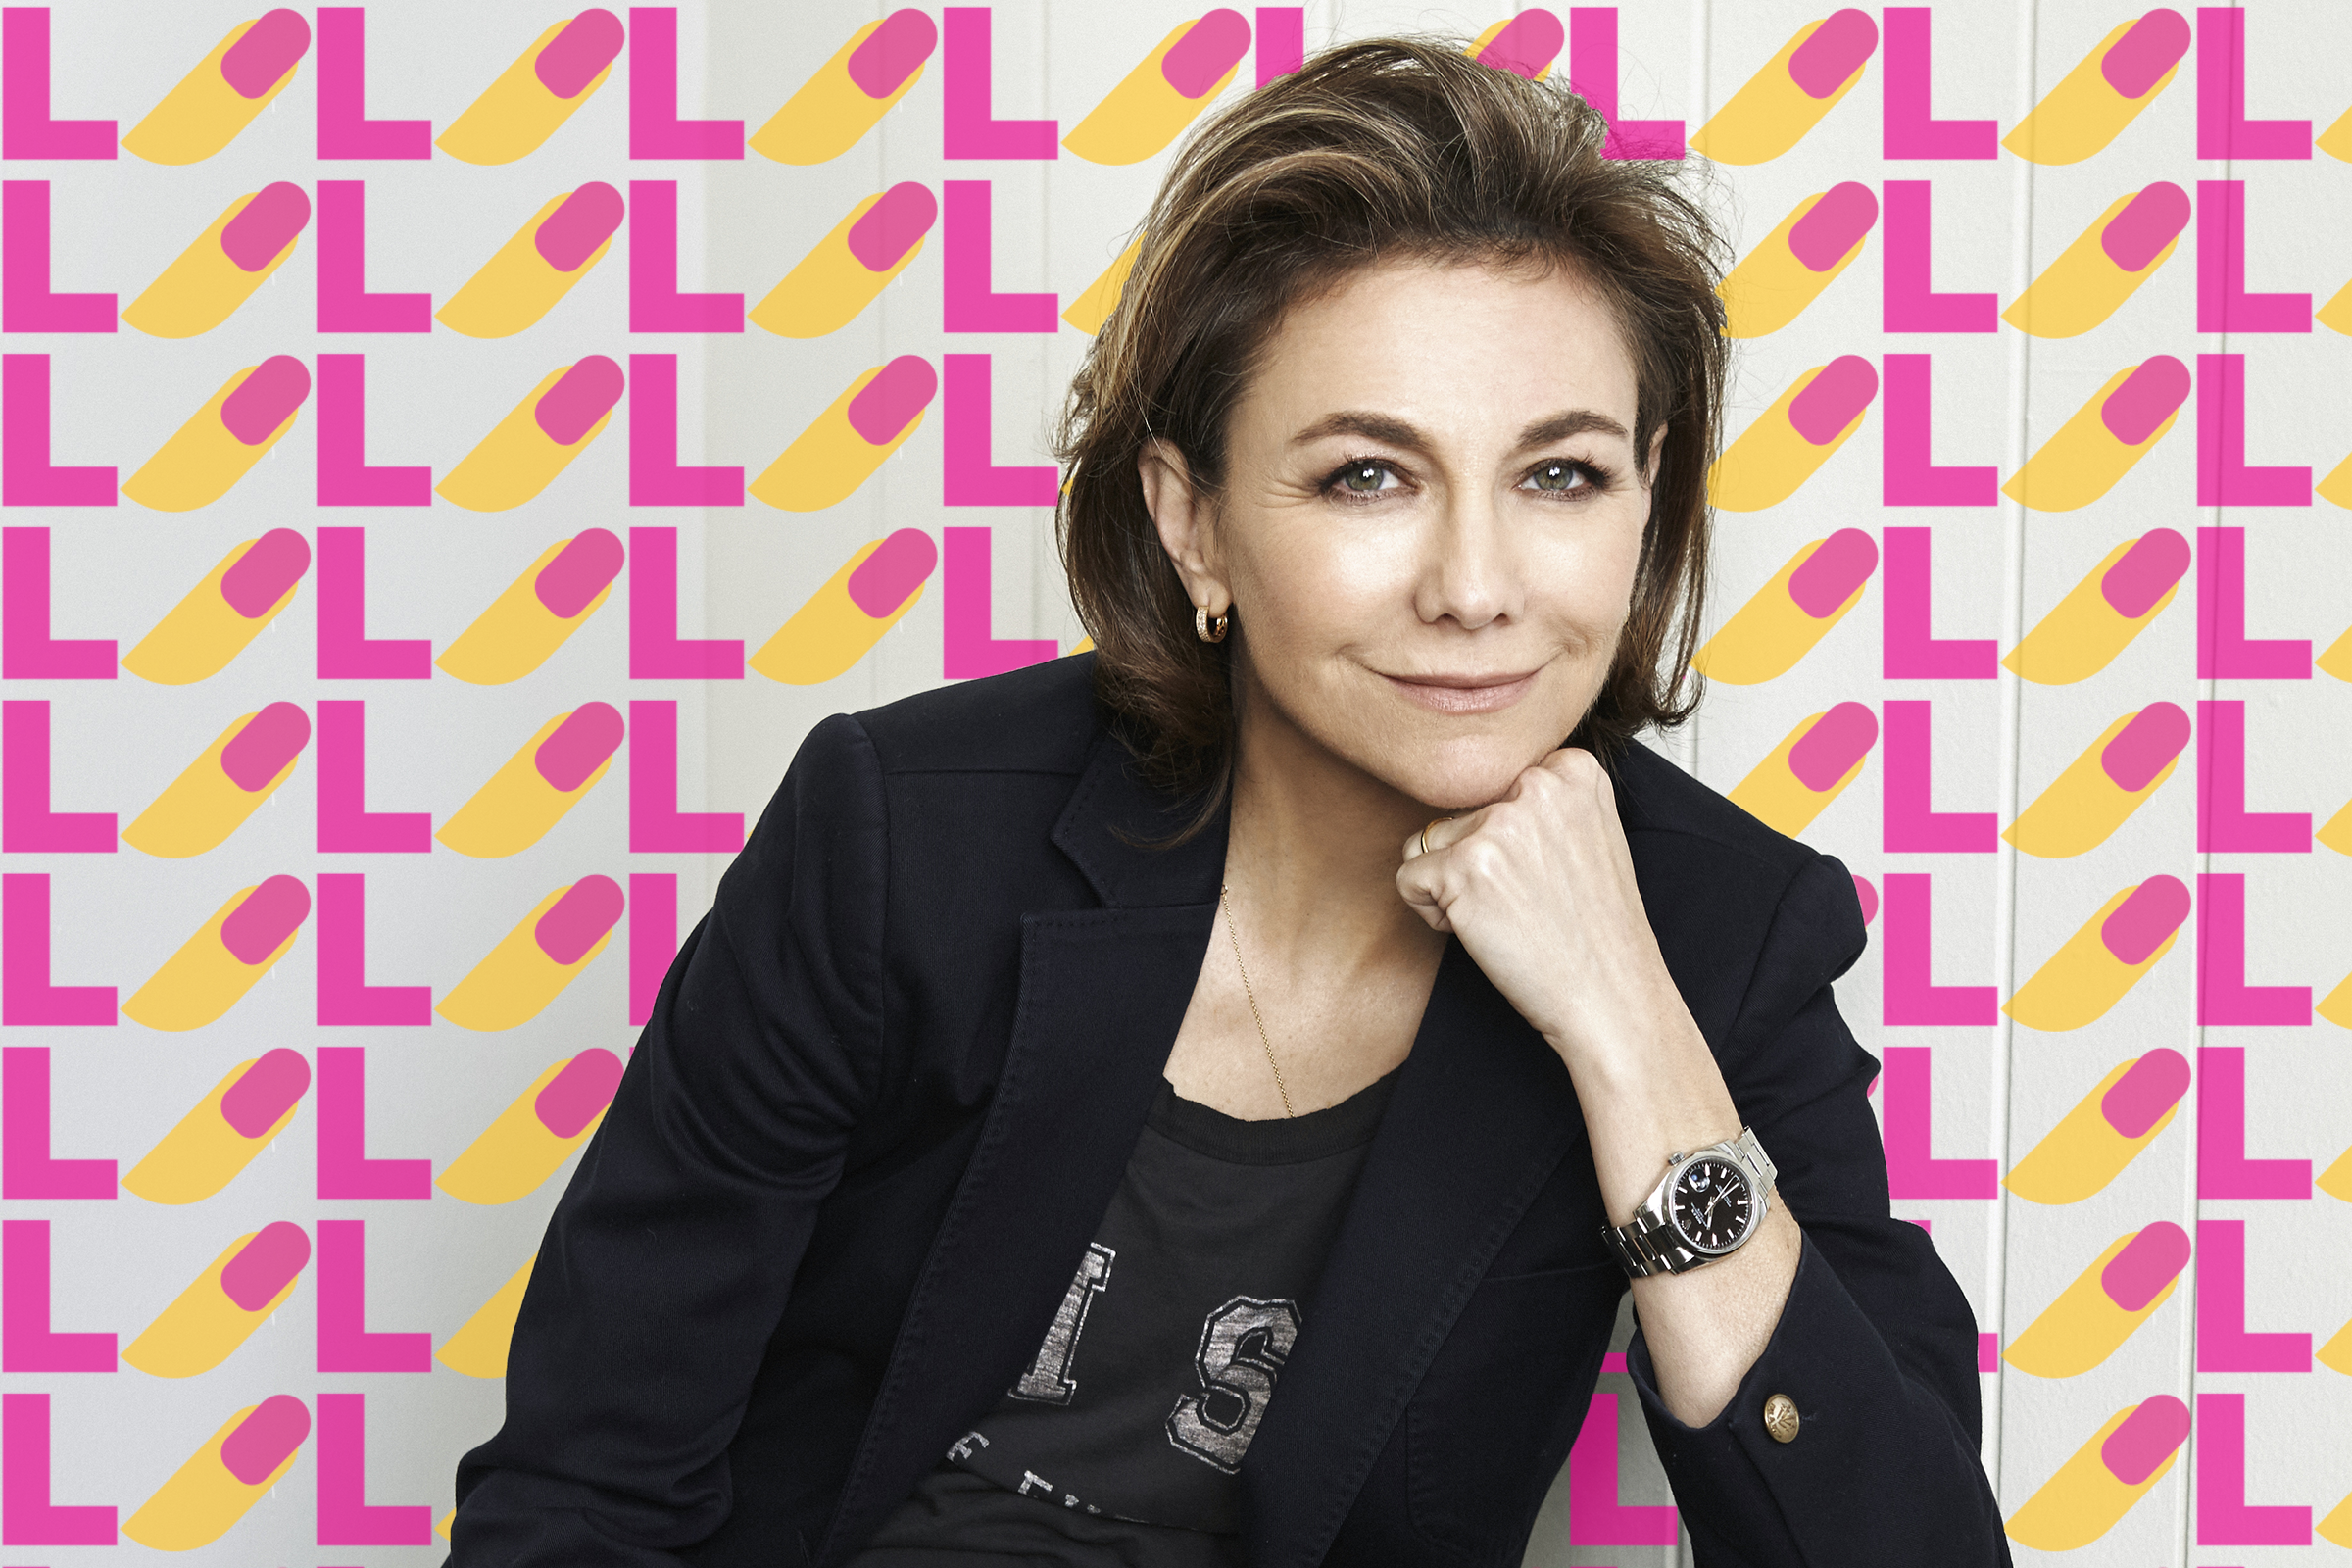 The L Word' creator Ilene Chaiken on what fans can expect from the